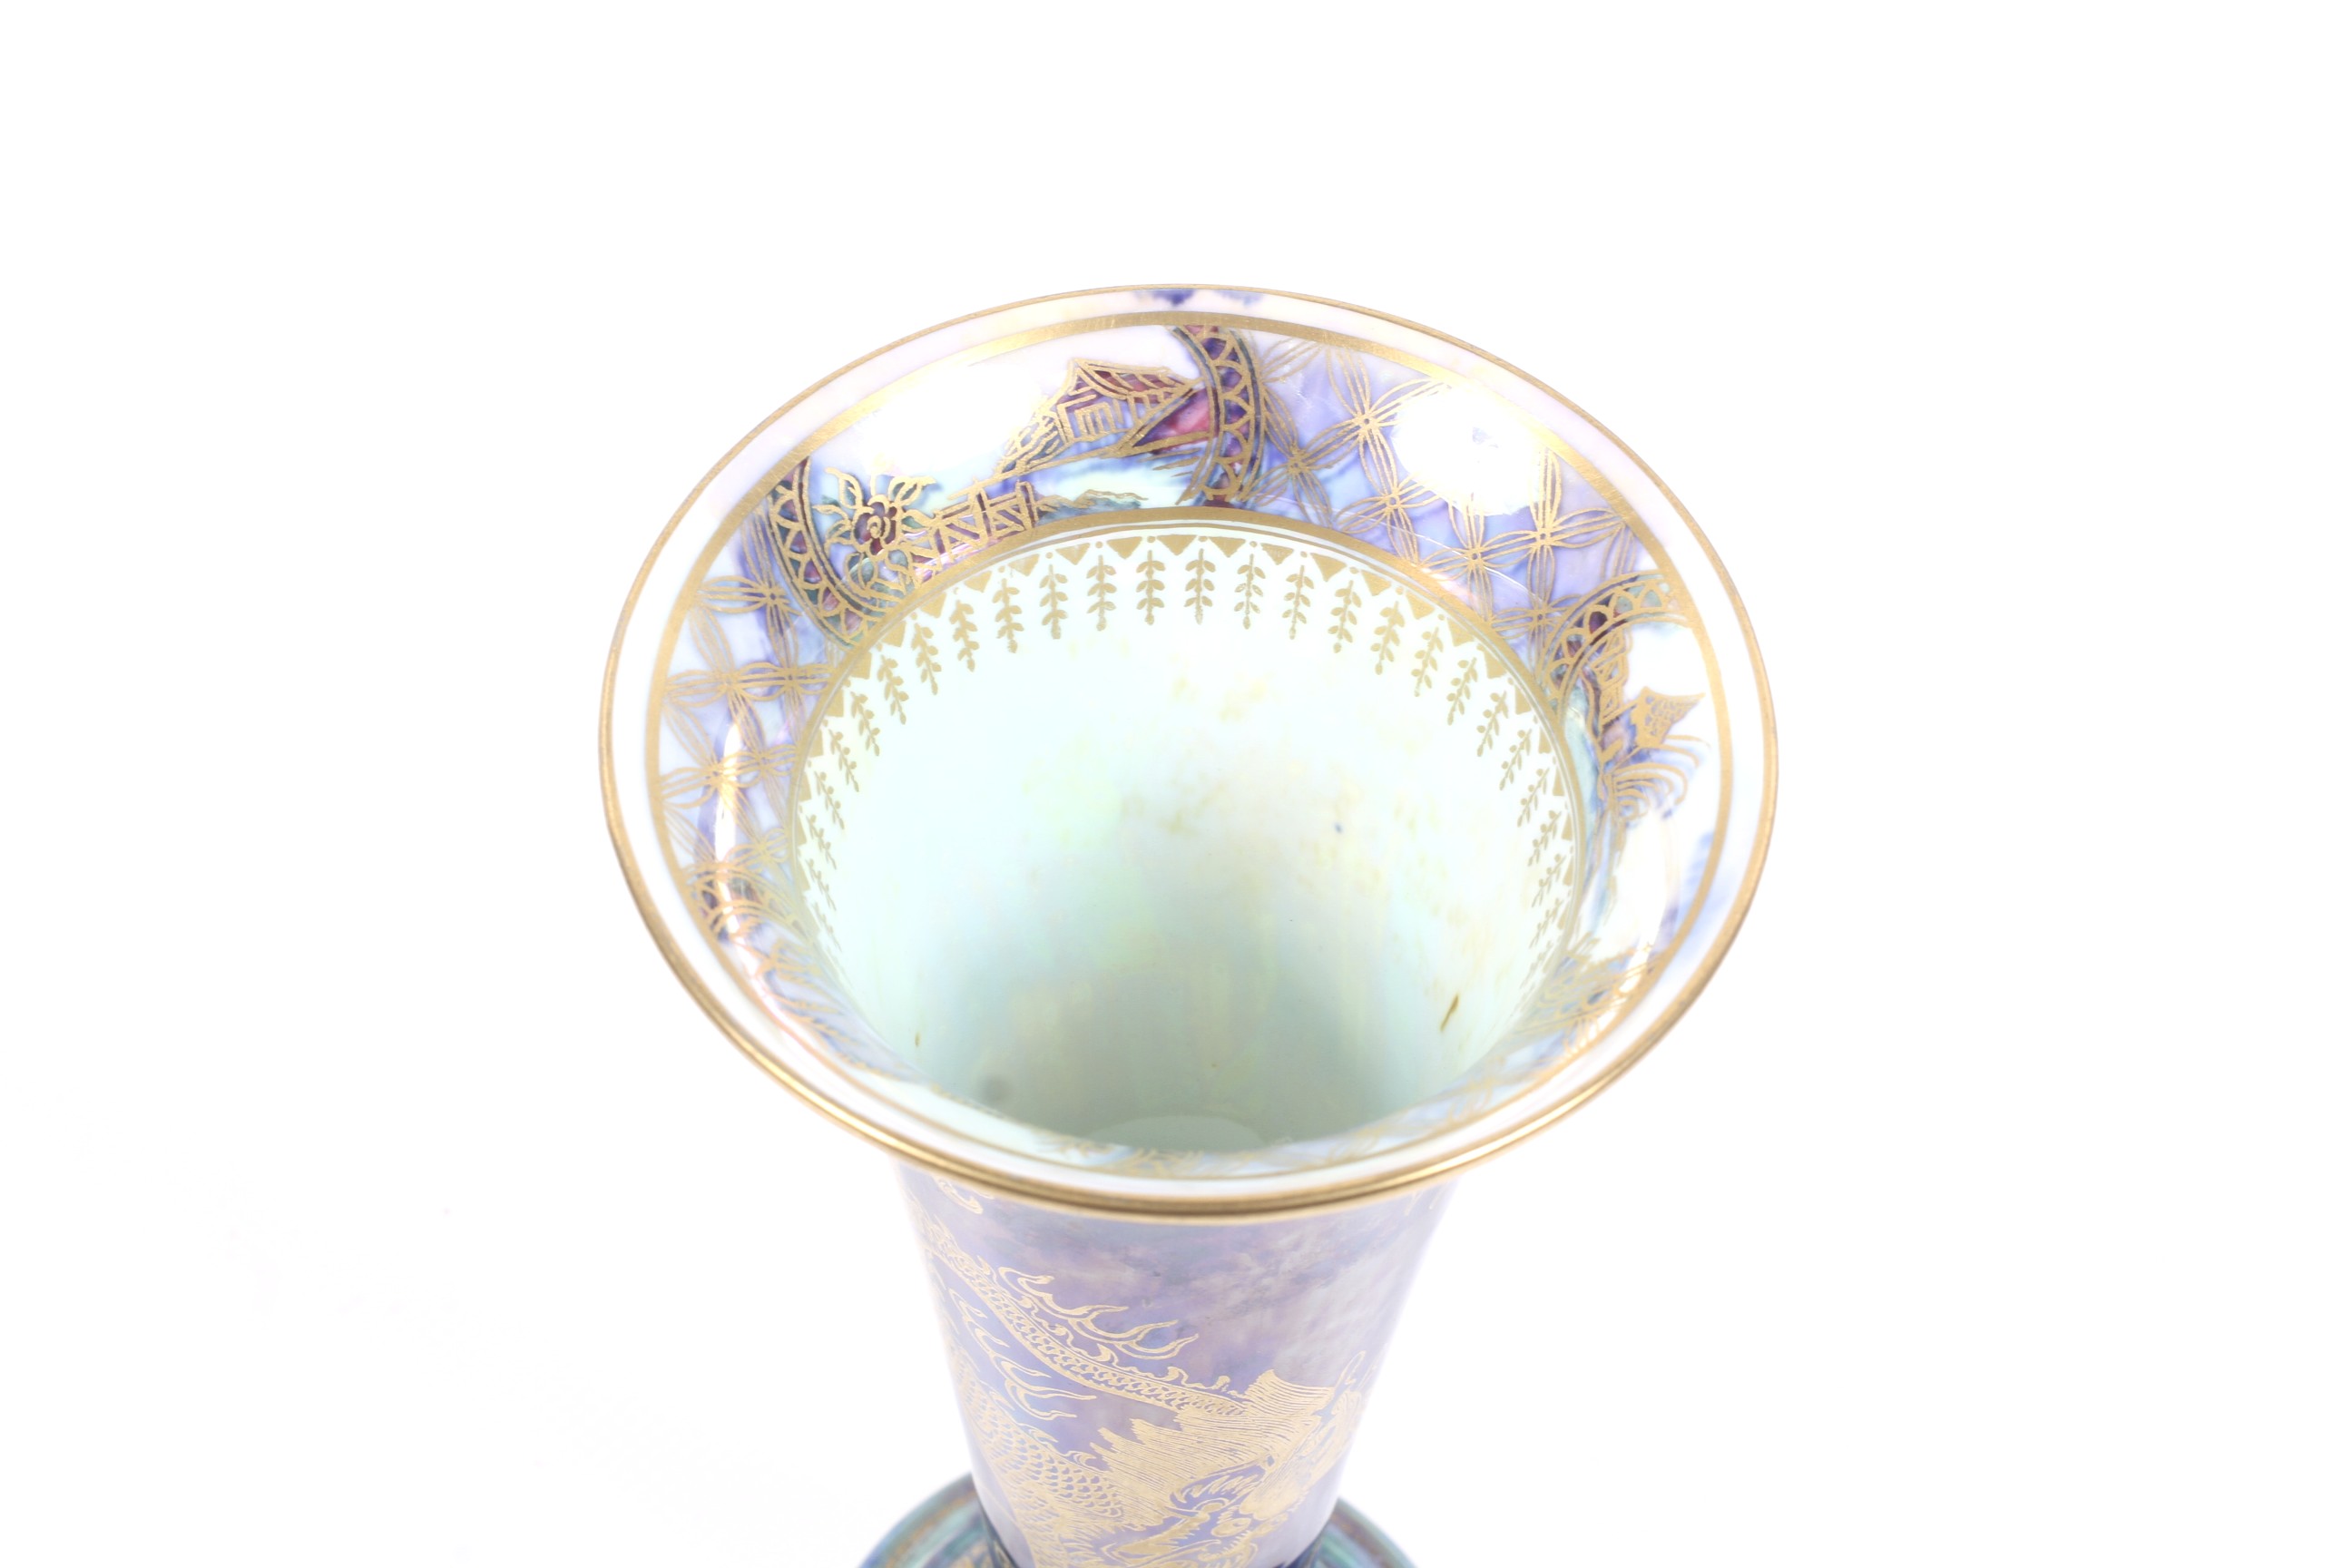 A Wedgwood 'Dragon' lustre vases designed by Daisy Makeig-Jones. - Image 2 of 3